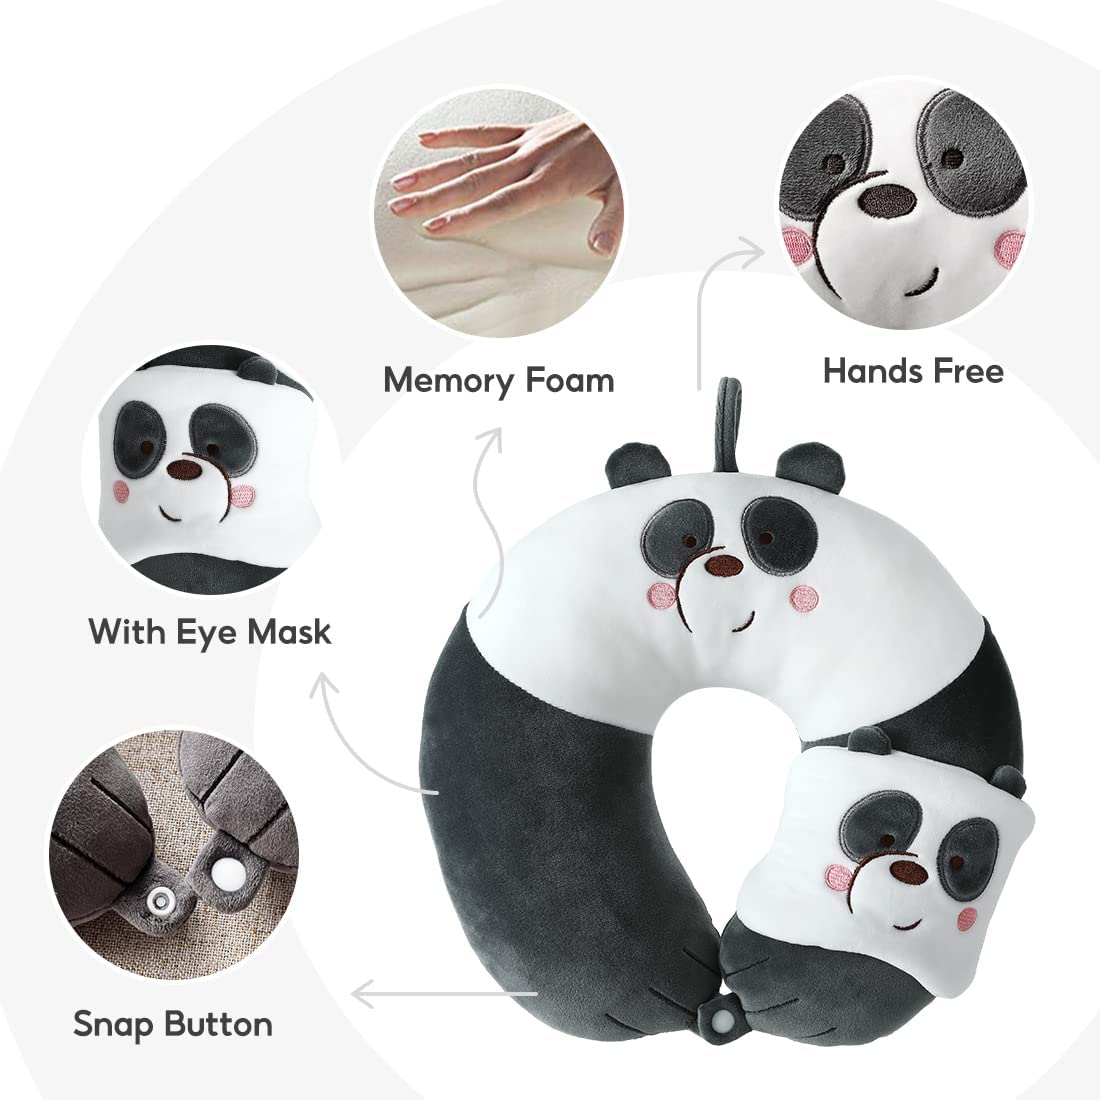 We bare bears neck pillow/travel pillow comes with eye shades